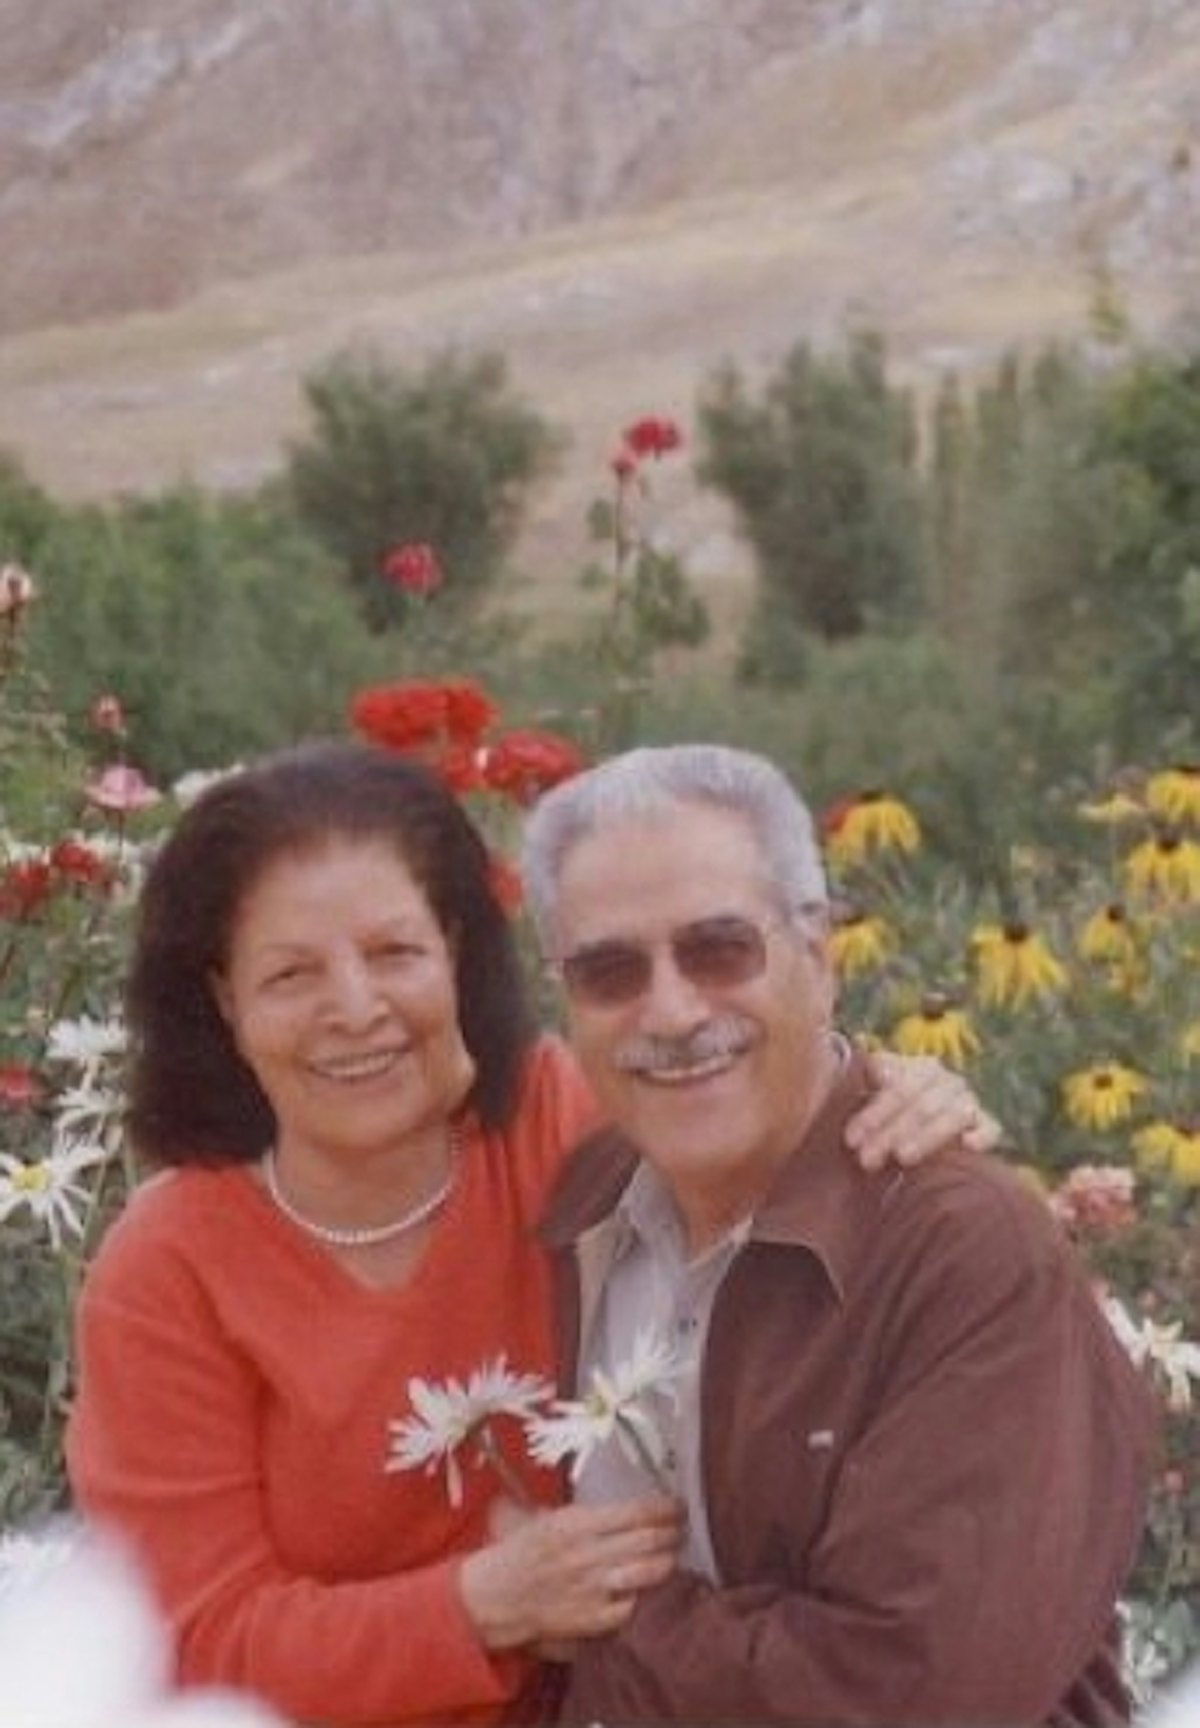 Mrs. Ashraf Khanjani, who has passed away at the age of 81, pictured with her husband, Jamaloddin, during happier times.